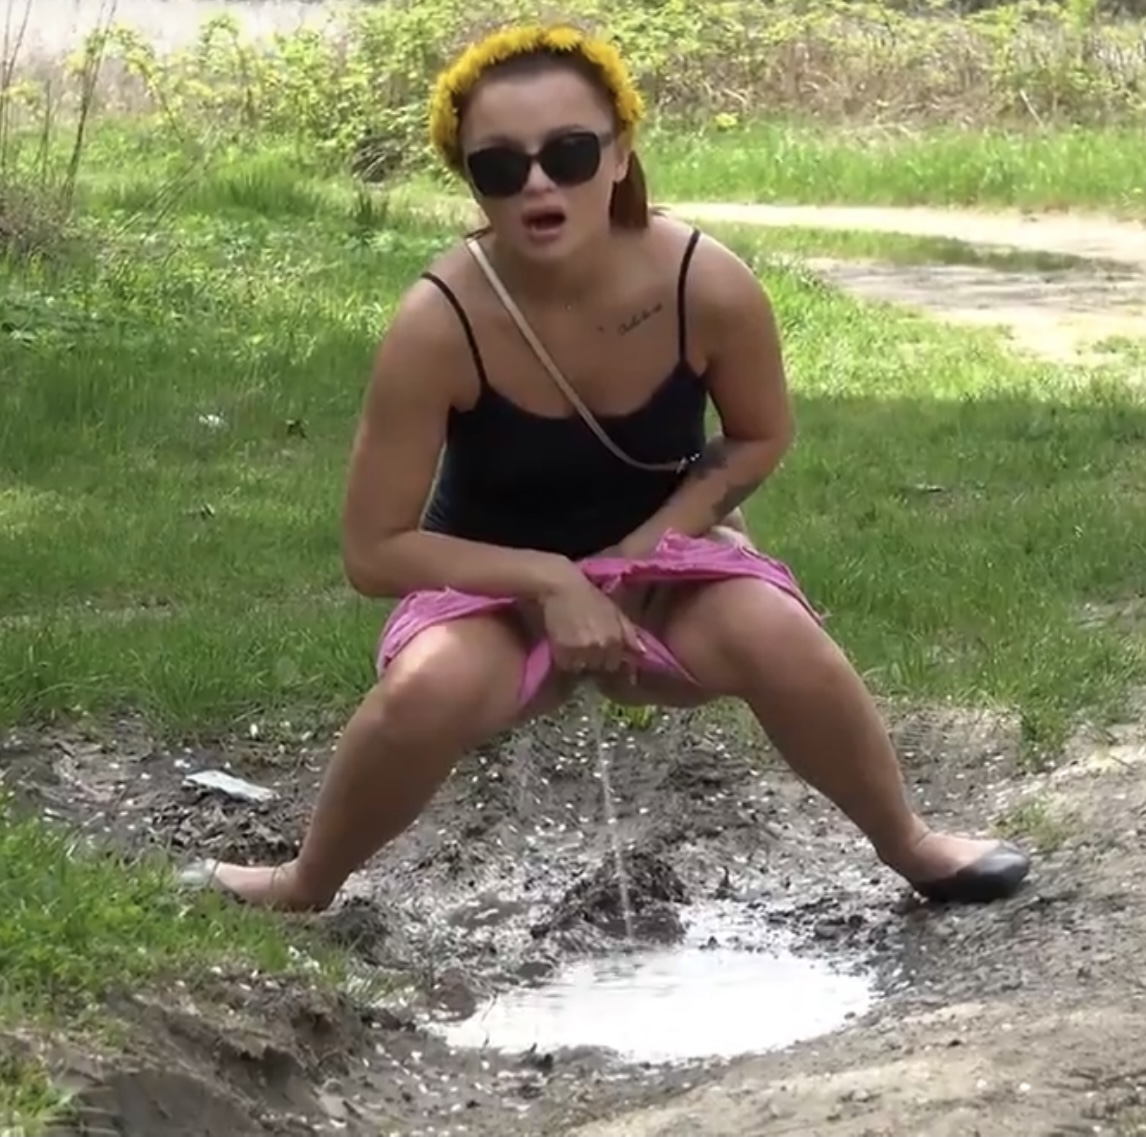 Desperate girl pees in puddle